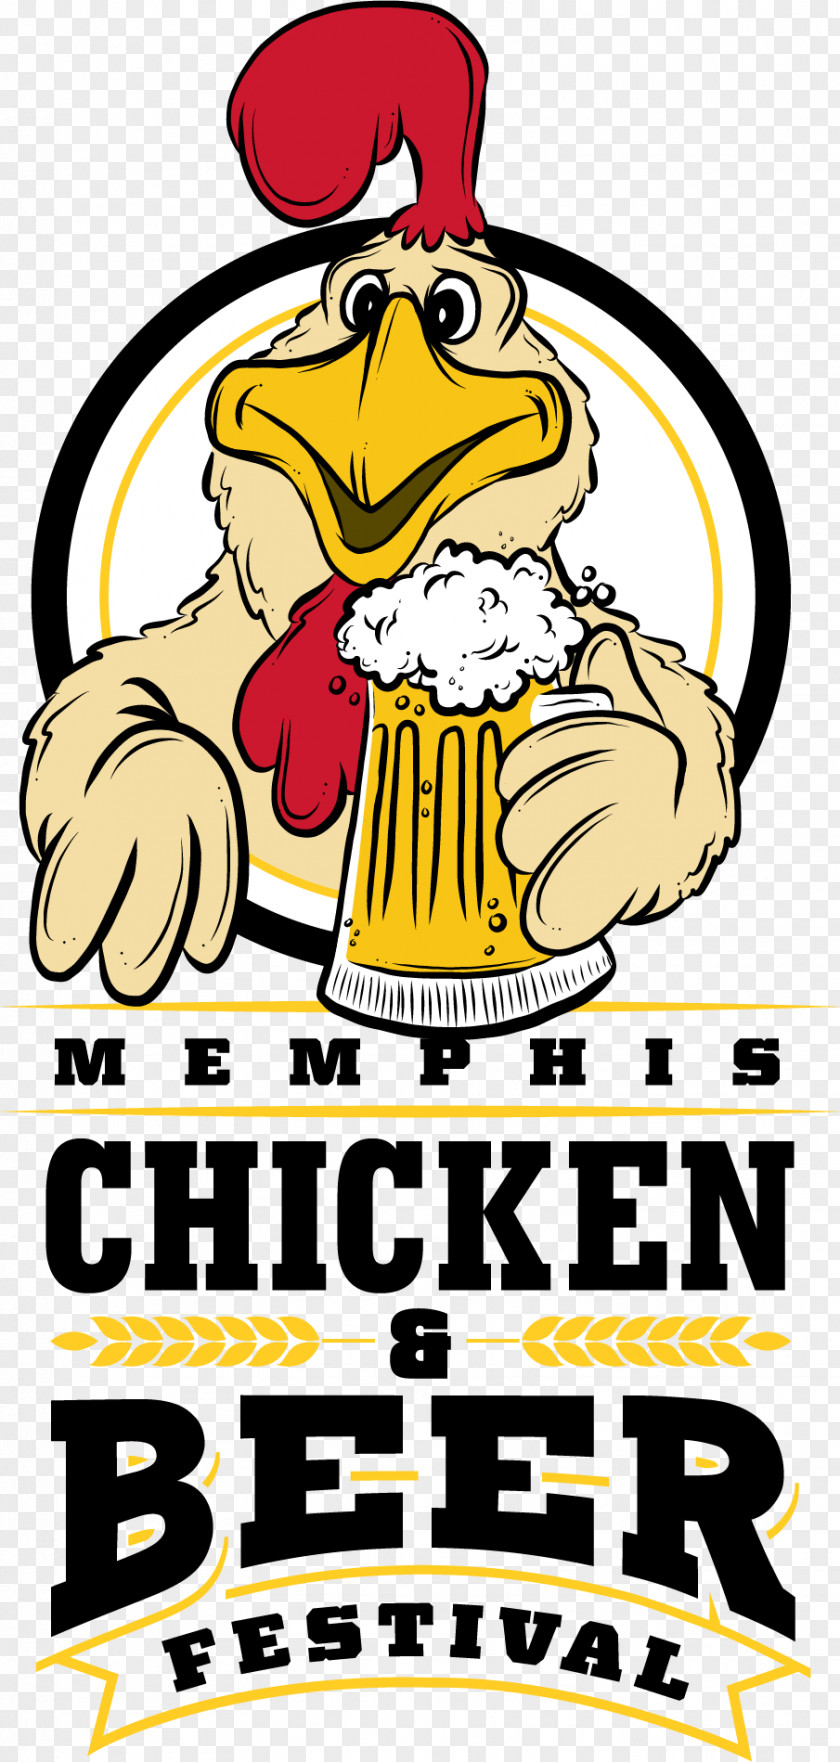 Bowling Flyer Beer Festival Memphis Chicken PNG